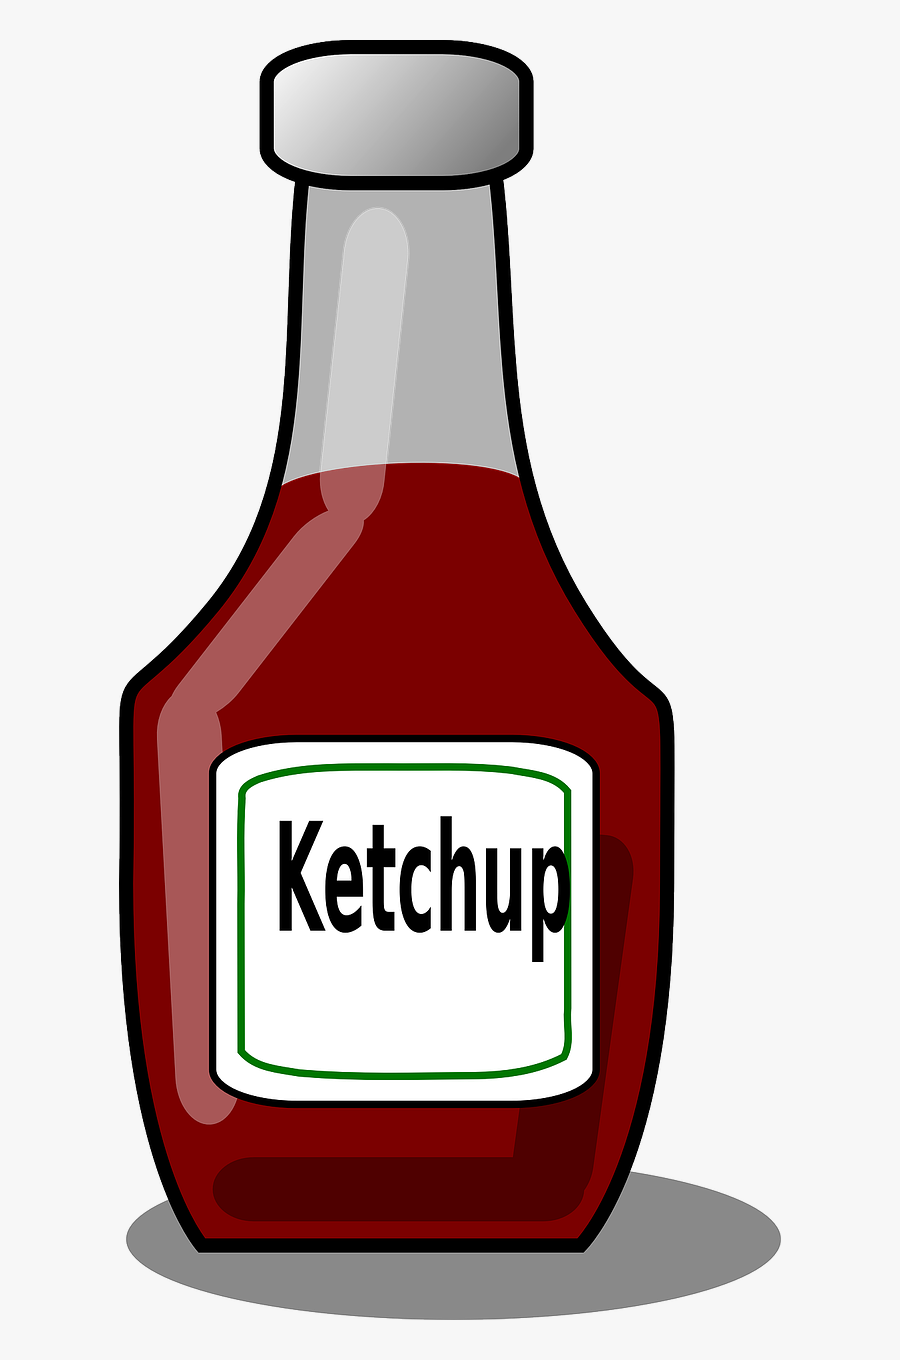 Ketchup Sauce Tomato Free Photo - Ketchup Bottle Clipart, Transparent Clipart